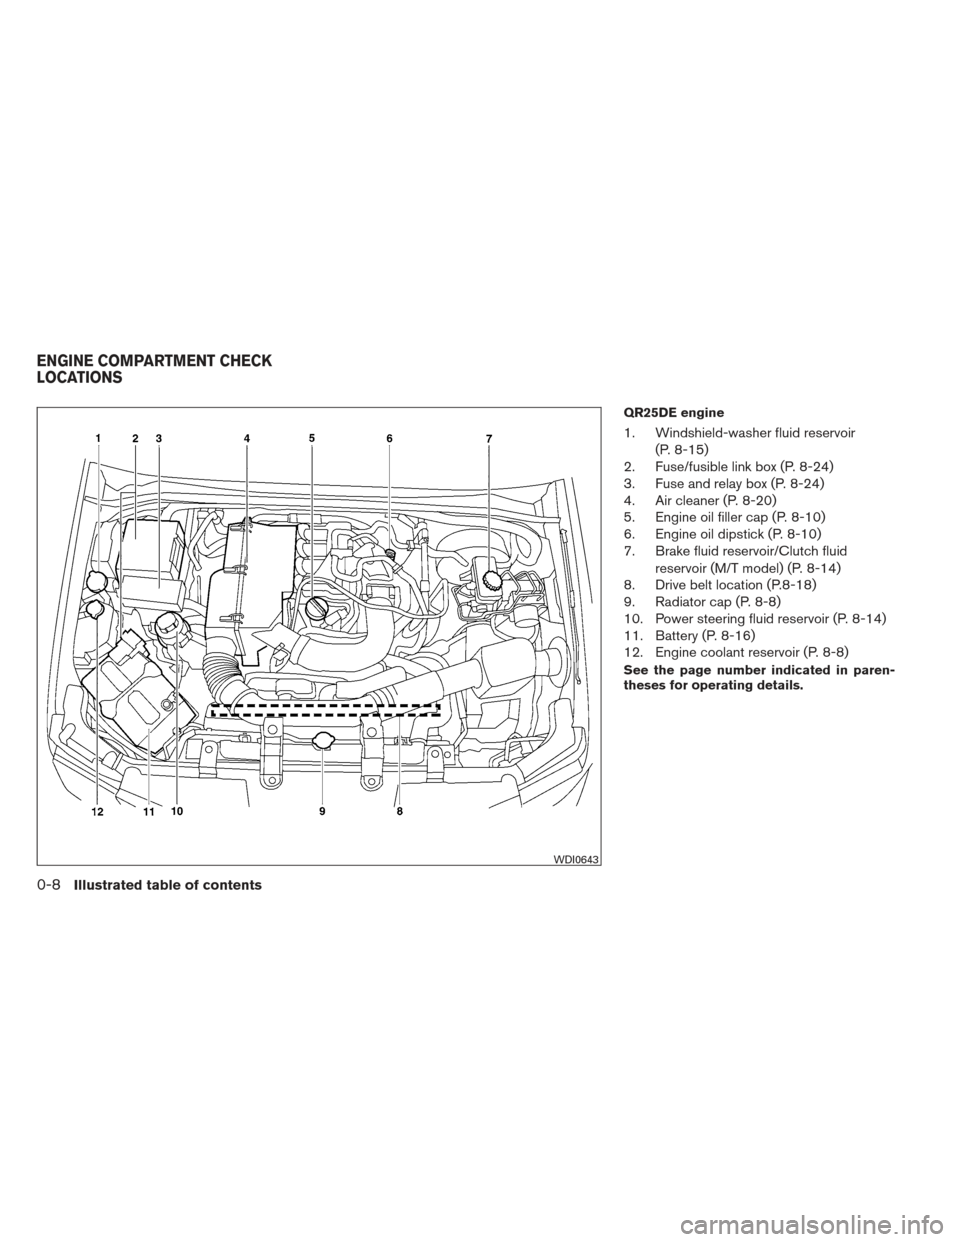 NISSAN FRONTIER 2013 D40 / 2.G Owners Manual QR25DE engine
1. Windshield-washer fluid reservoir(P. 8-15)
2. Fuse/fusible link box (P. 8-24)
3. Fuse and relay box (P. 8-24)
4. Air cleaner (P. 8-20)
5. Engine oil filler cap (P. 8-10)
6. Engine oil